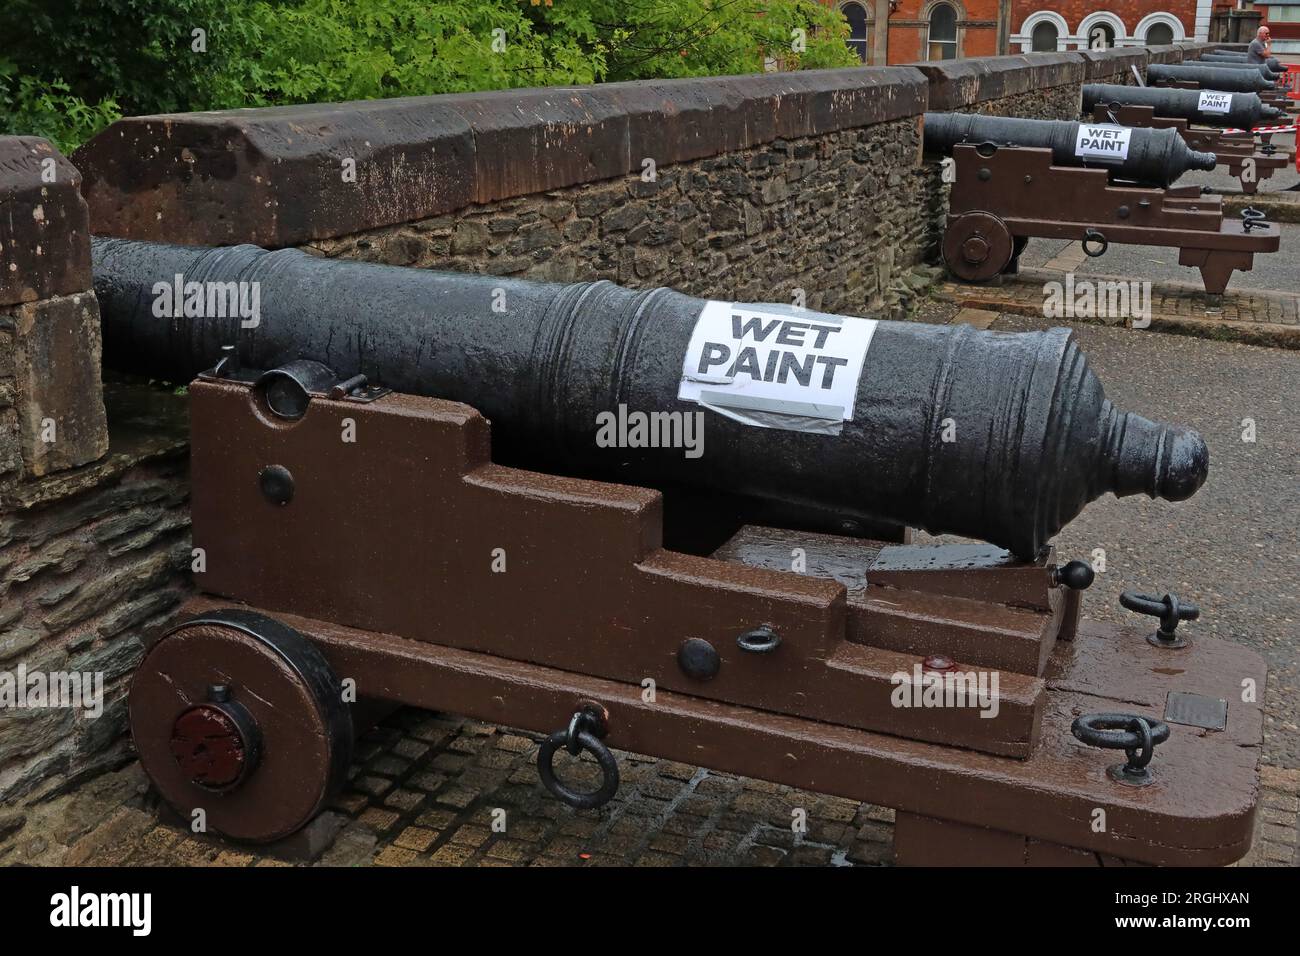 Wet paint, repainting historic Cannons on the Londonderry walls, pointing out from the city, County Derry, Northern Ireland, UK, BT48 6PJ Stock Photo